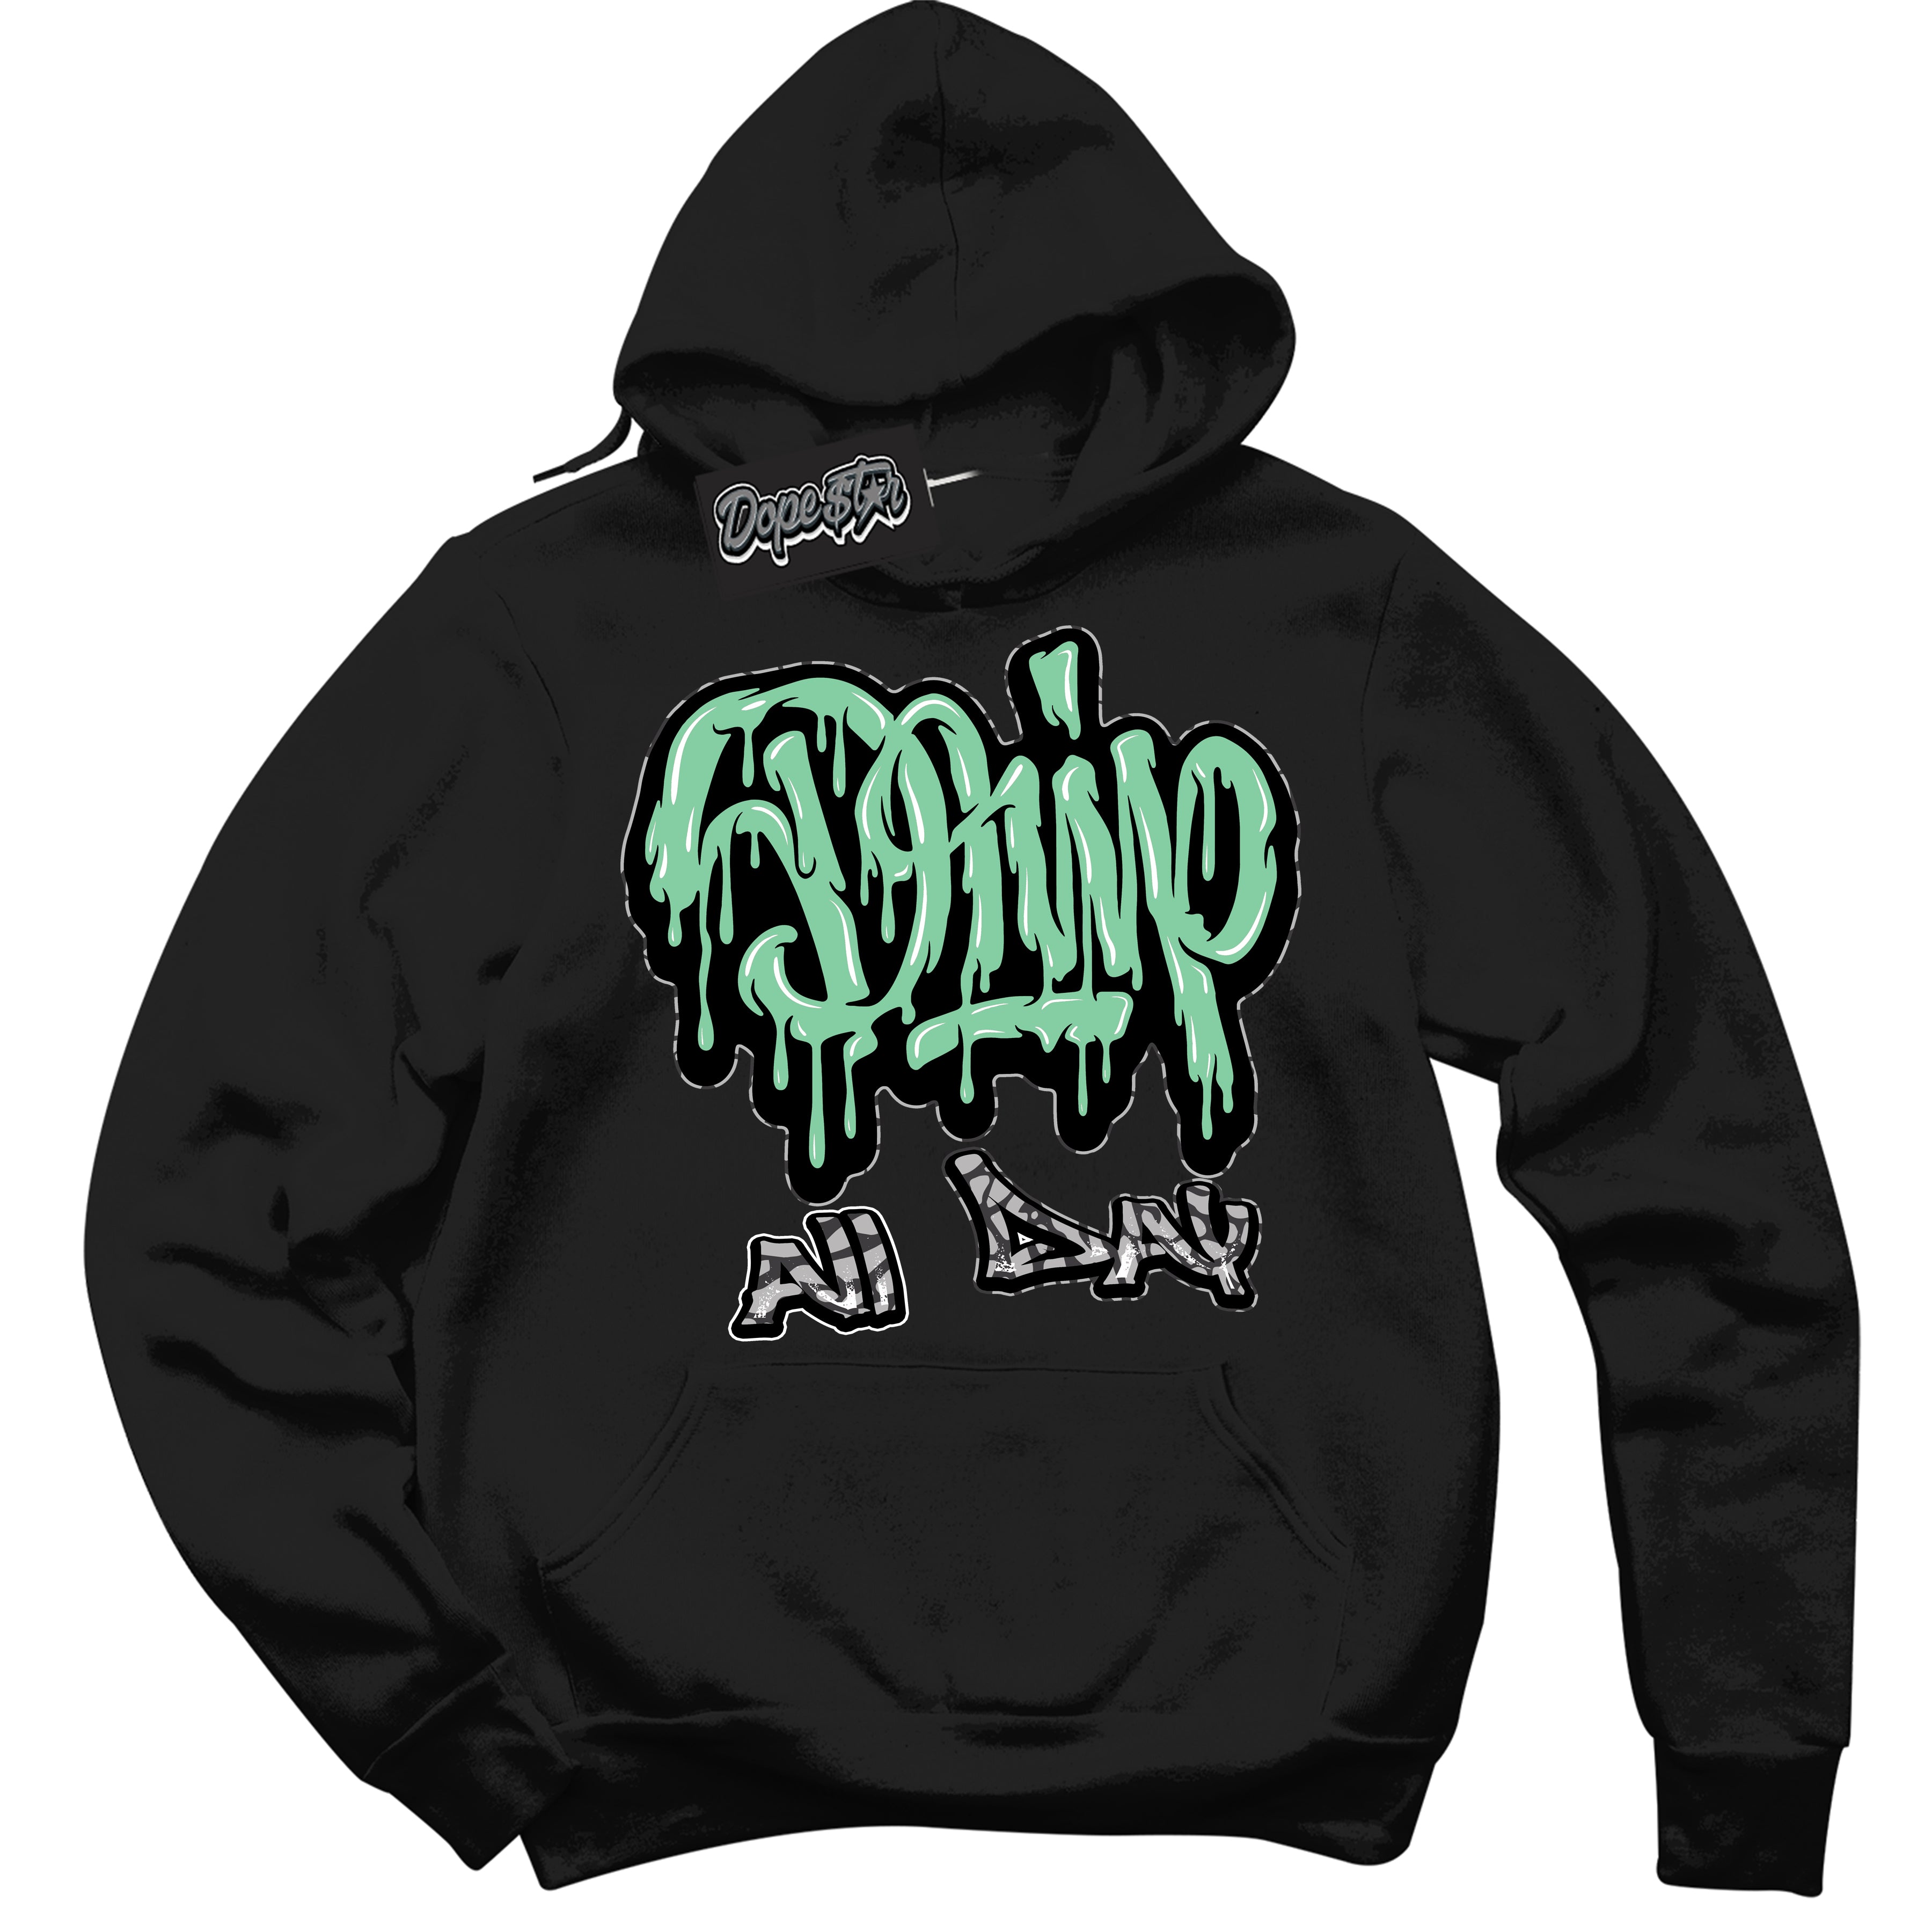 Cool Black Graphic DopeStar Hoodie with “ Drip All Day “ print, that perfectly matches Green Glow 3S sneakers